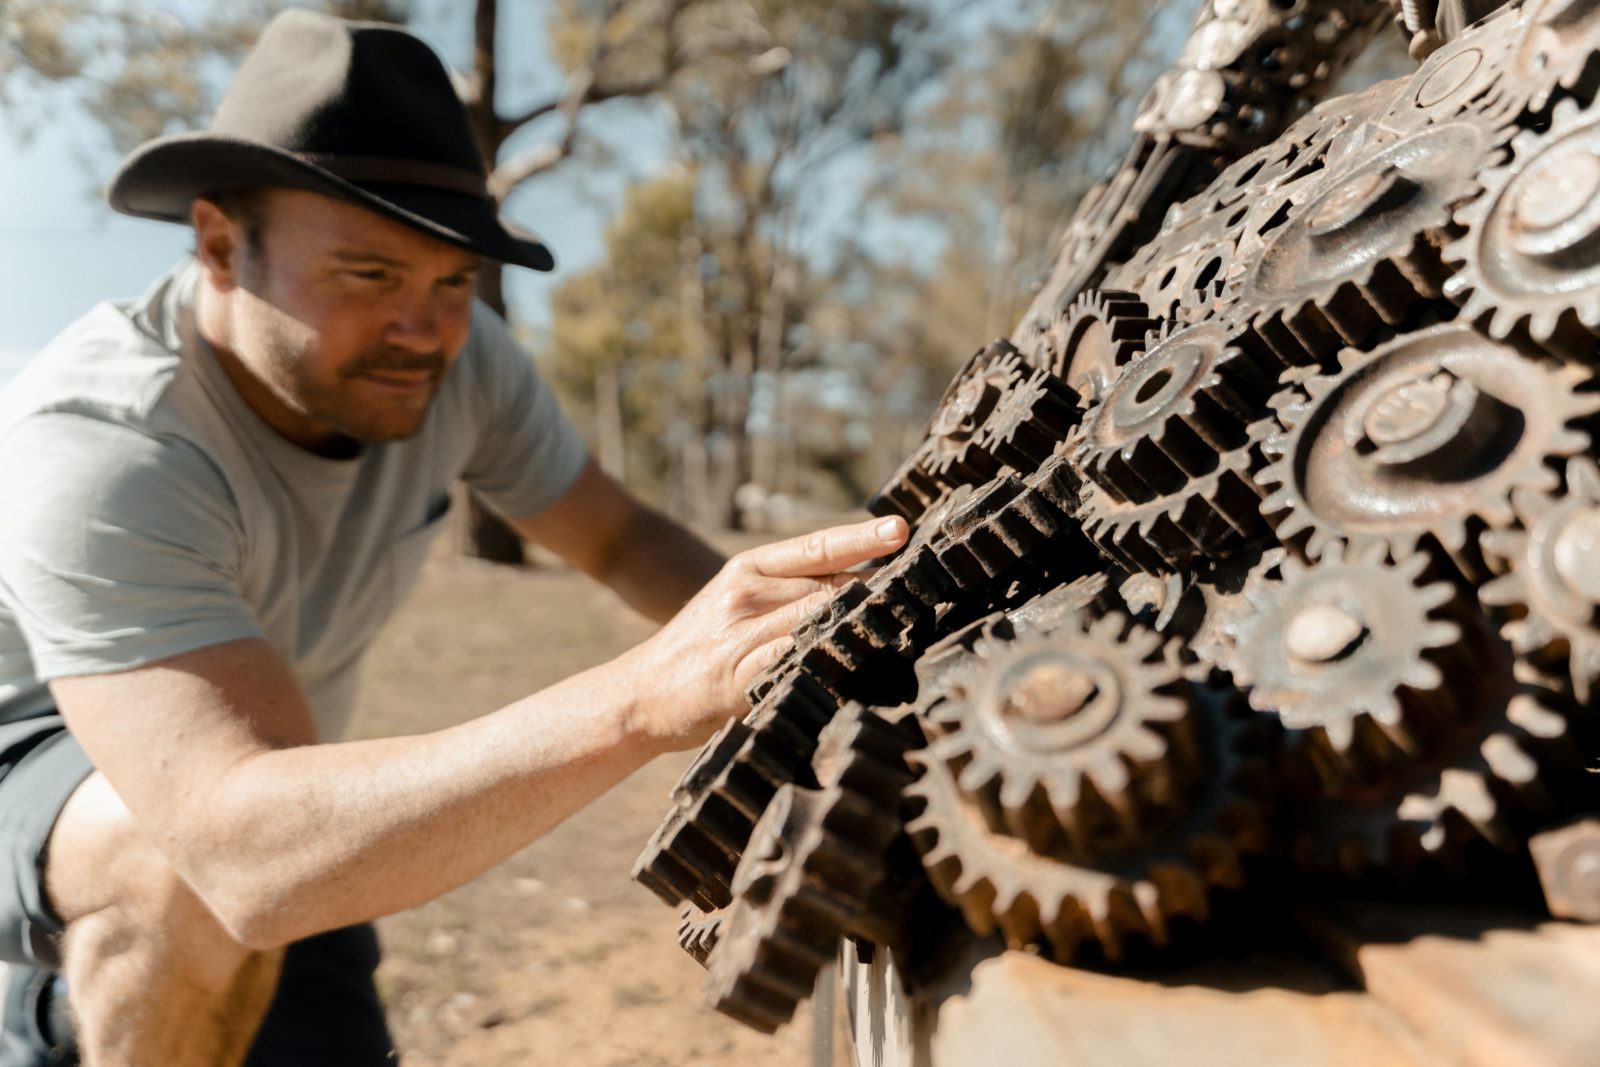 A man rests a hand on iron cogs that form the fleece of a ram sculpture.